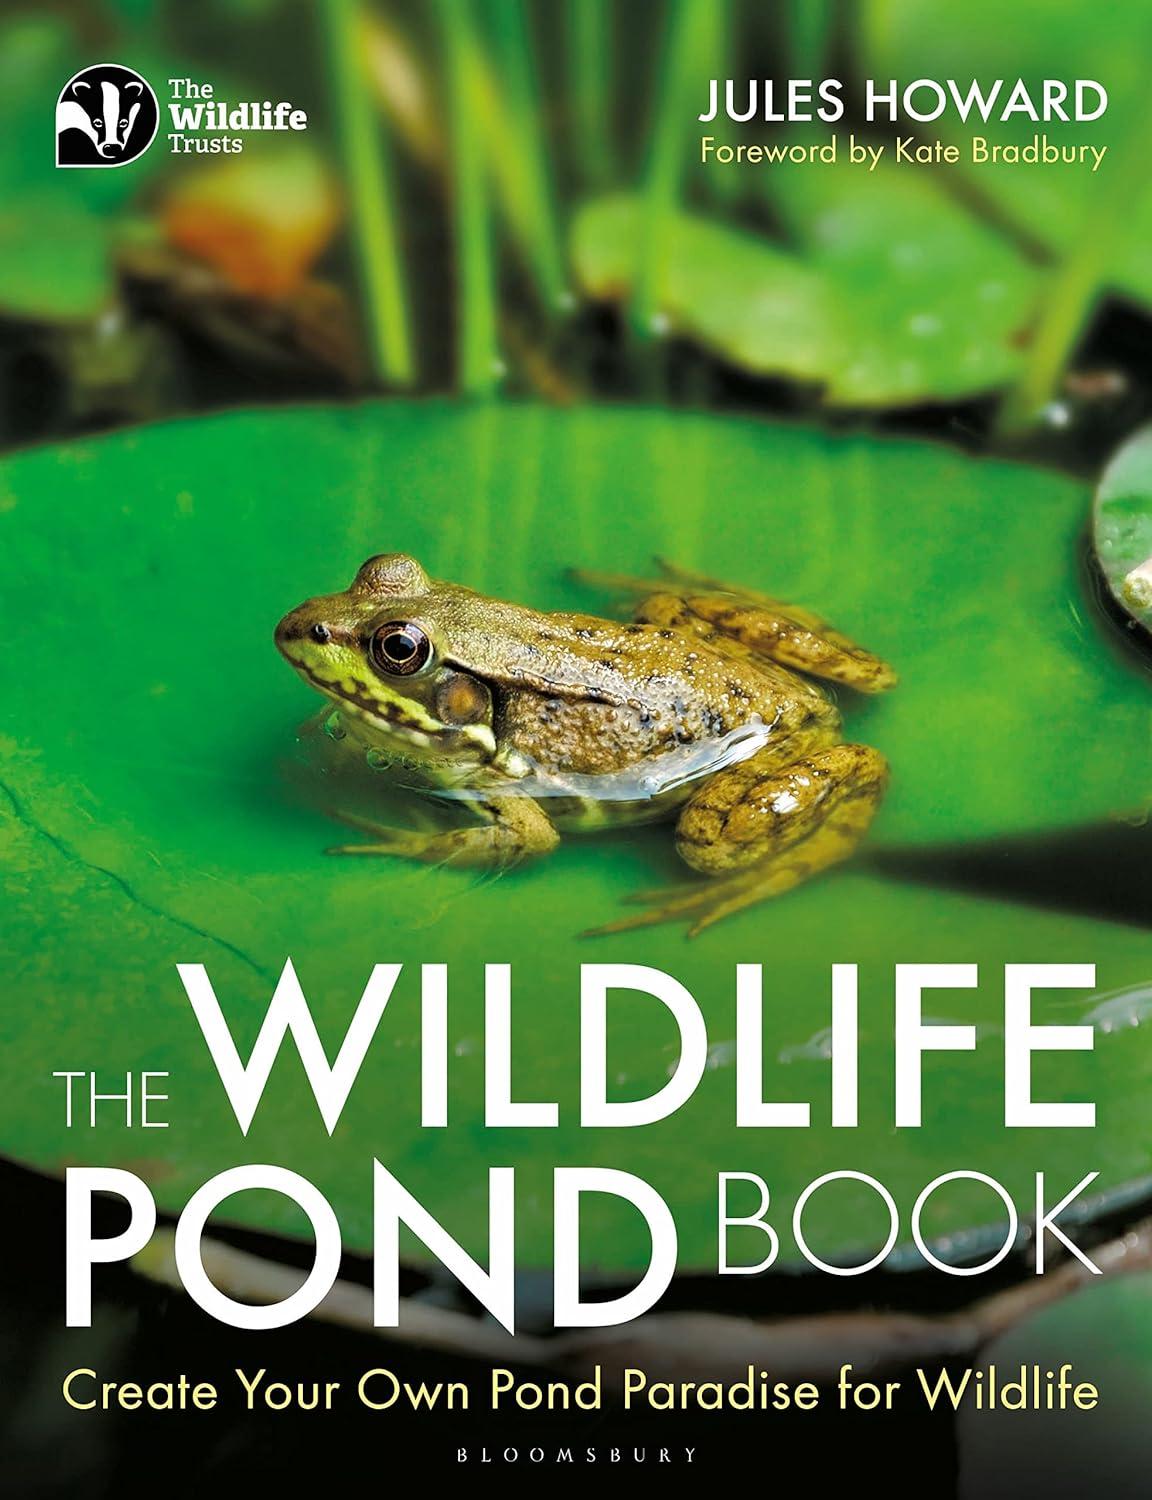 the wildlife pond book create your own pond paradise for wildlife the wildlife trusts 1st edition jules